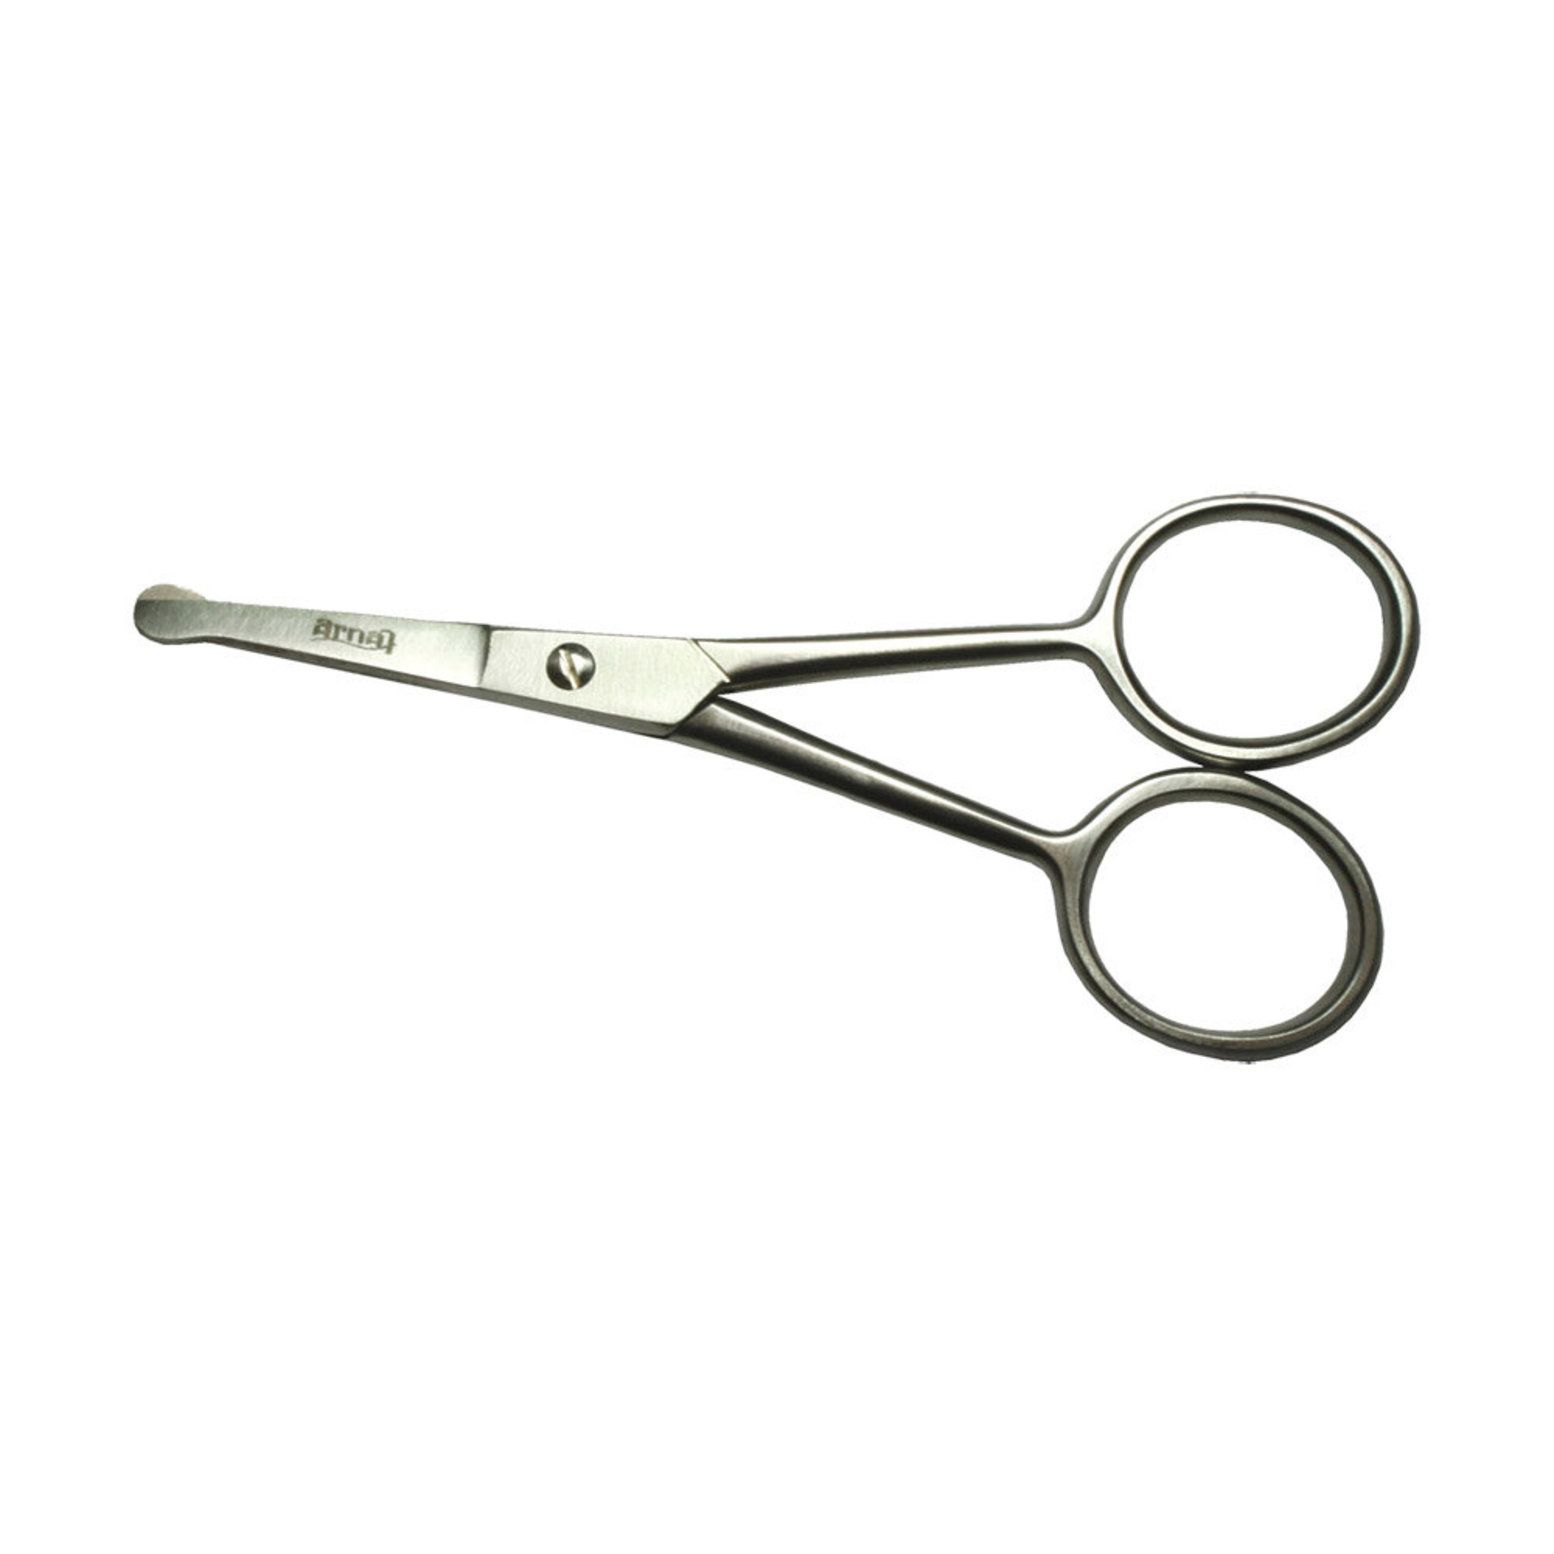 4 3/4 Wire cutting Scissors - sharp curved serr - BOSS Surgical